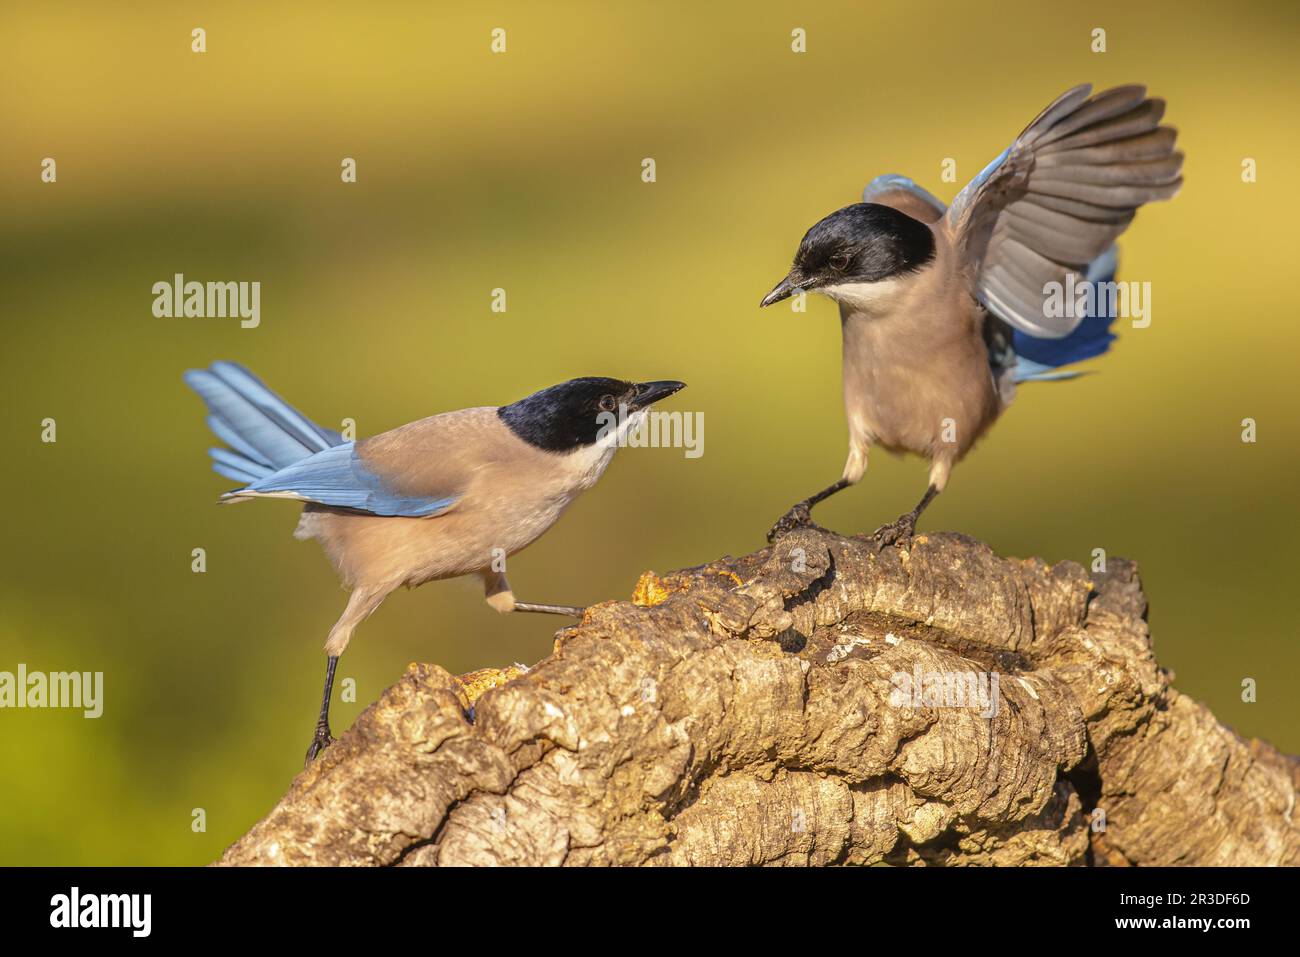 Iberian magpie (Cyanopica cooki) is a Bird in the Crow family. Bird chasing away other Bird on Trunk against Bright Background in Extremadura, Spain. Stock Photo